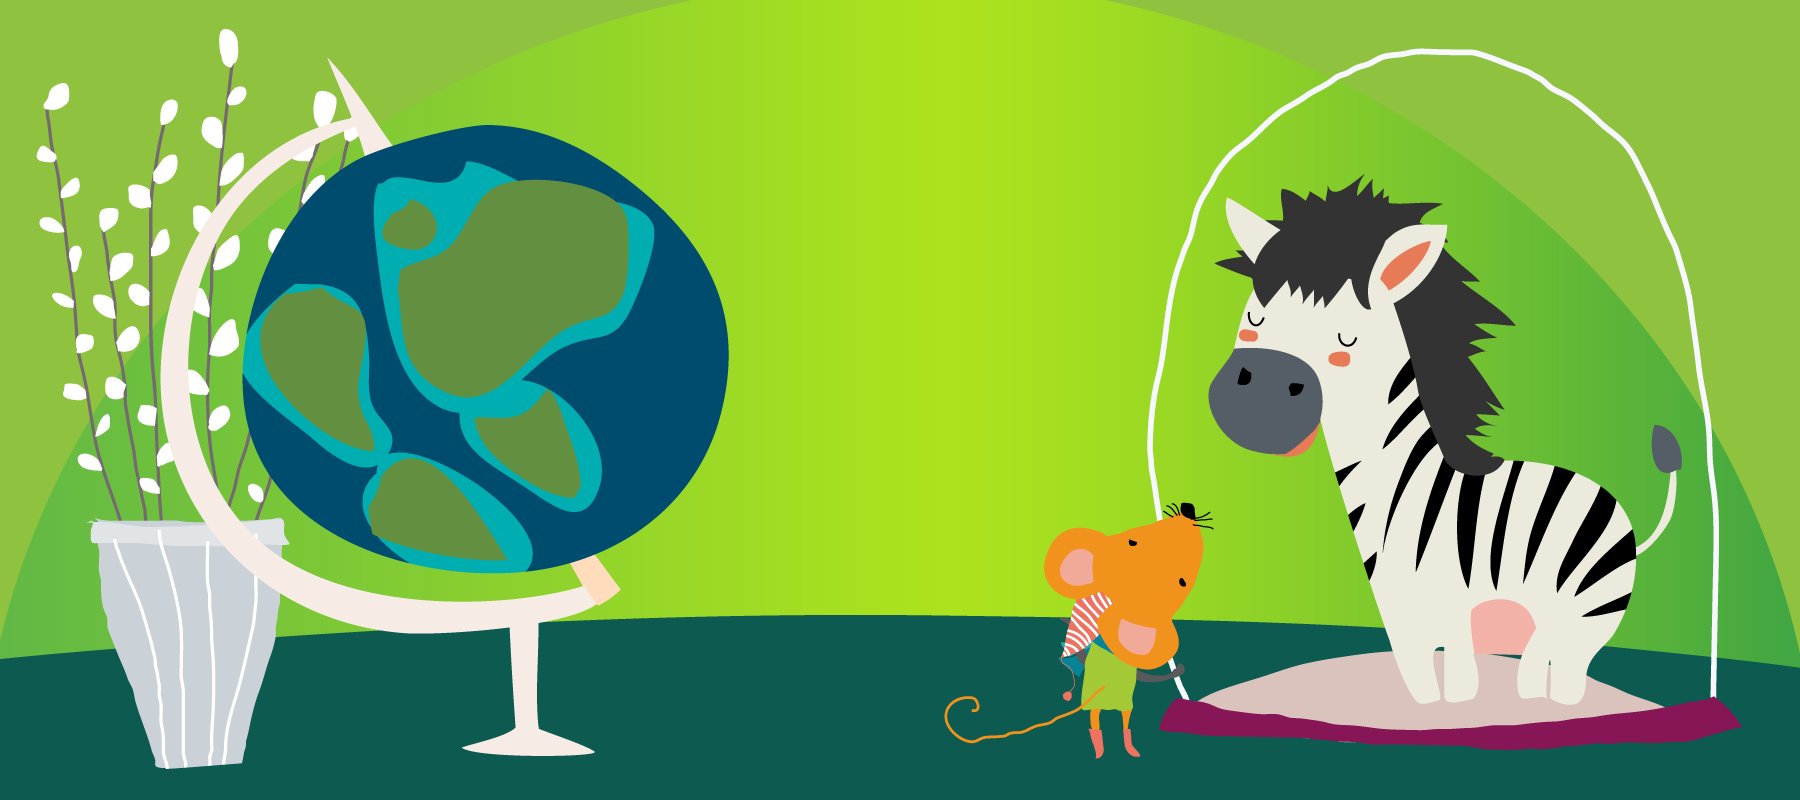 illustration on a green background, globe on the left, and a mouse viewing a zebra in a snow globe on the right.